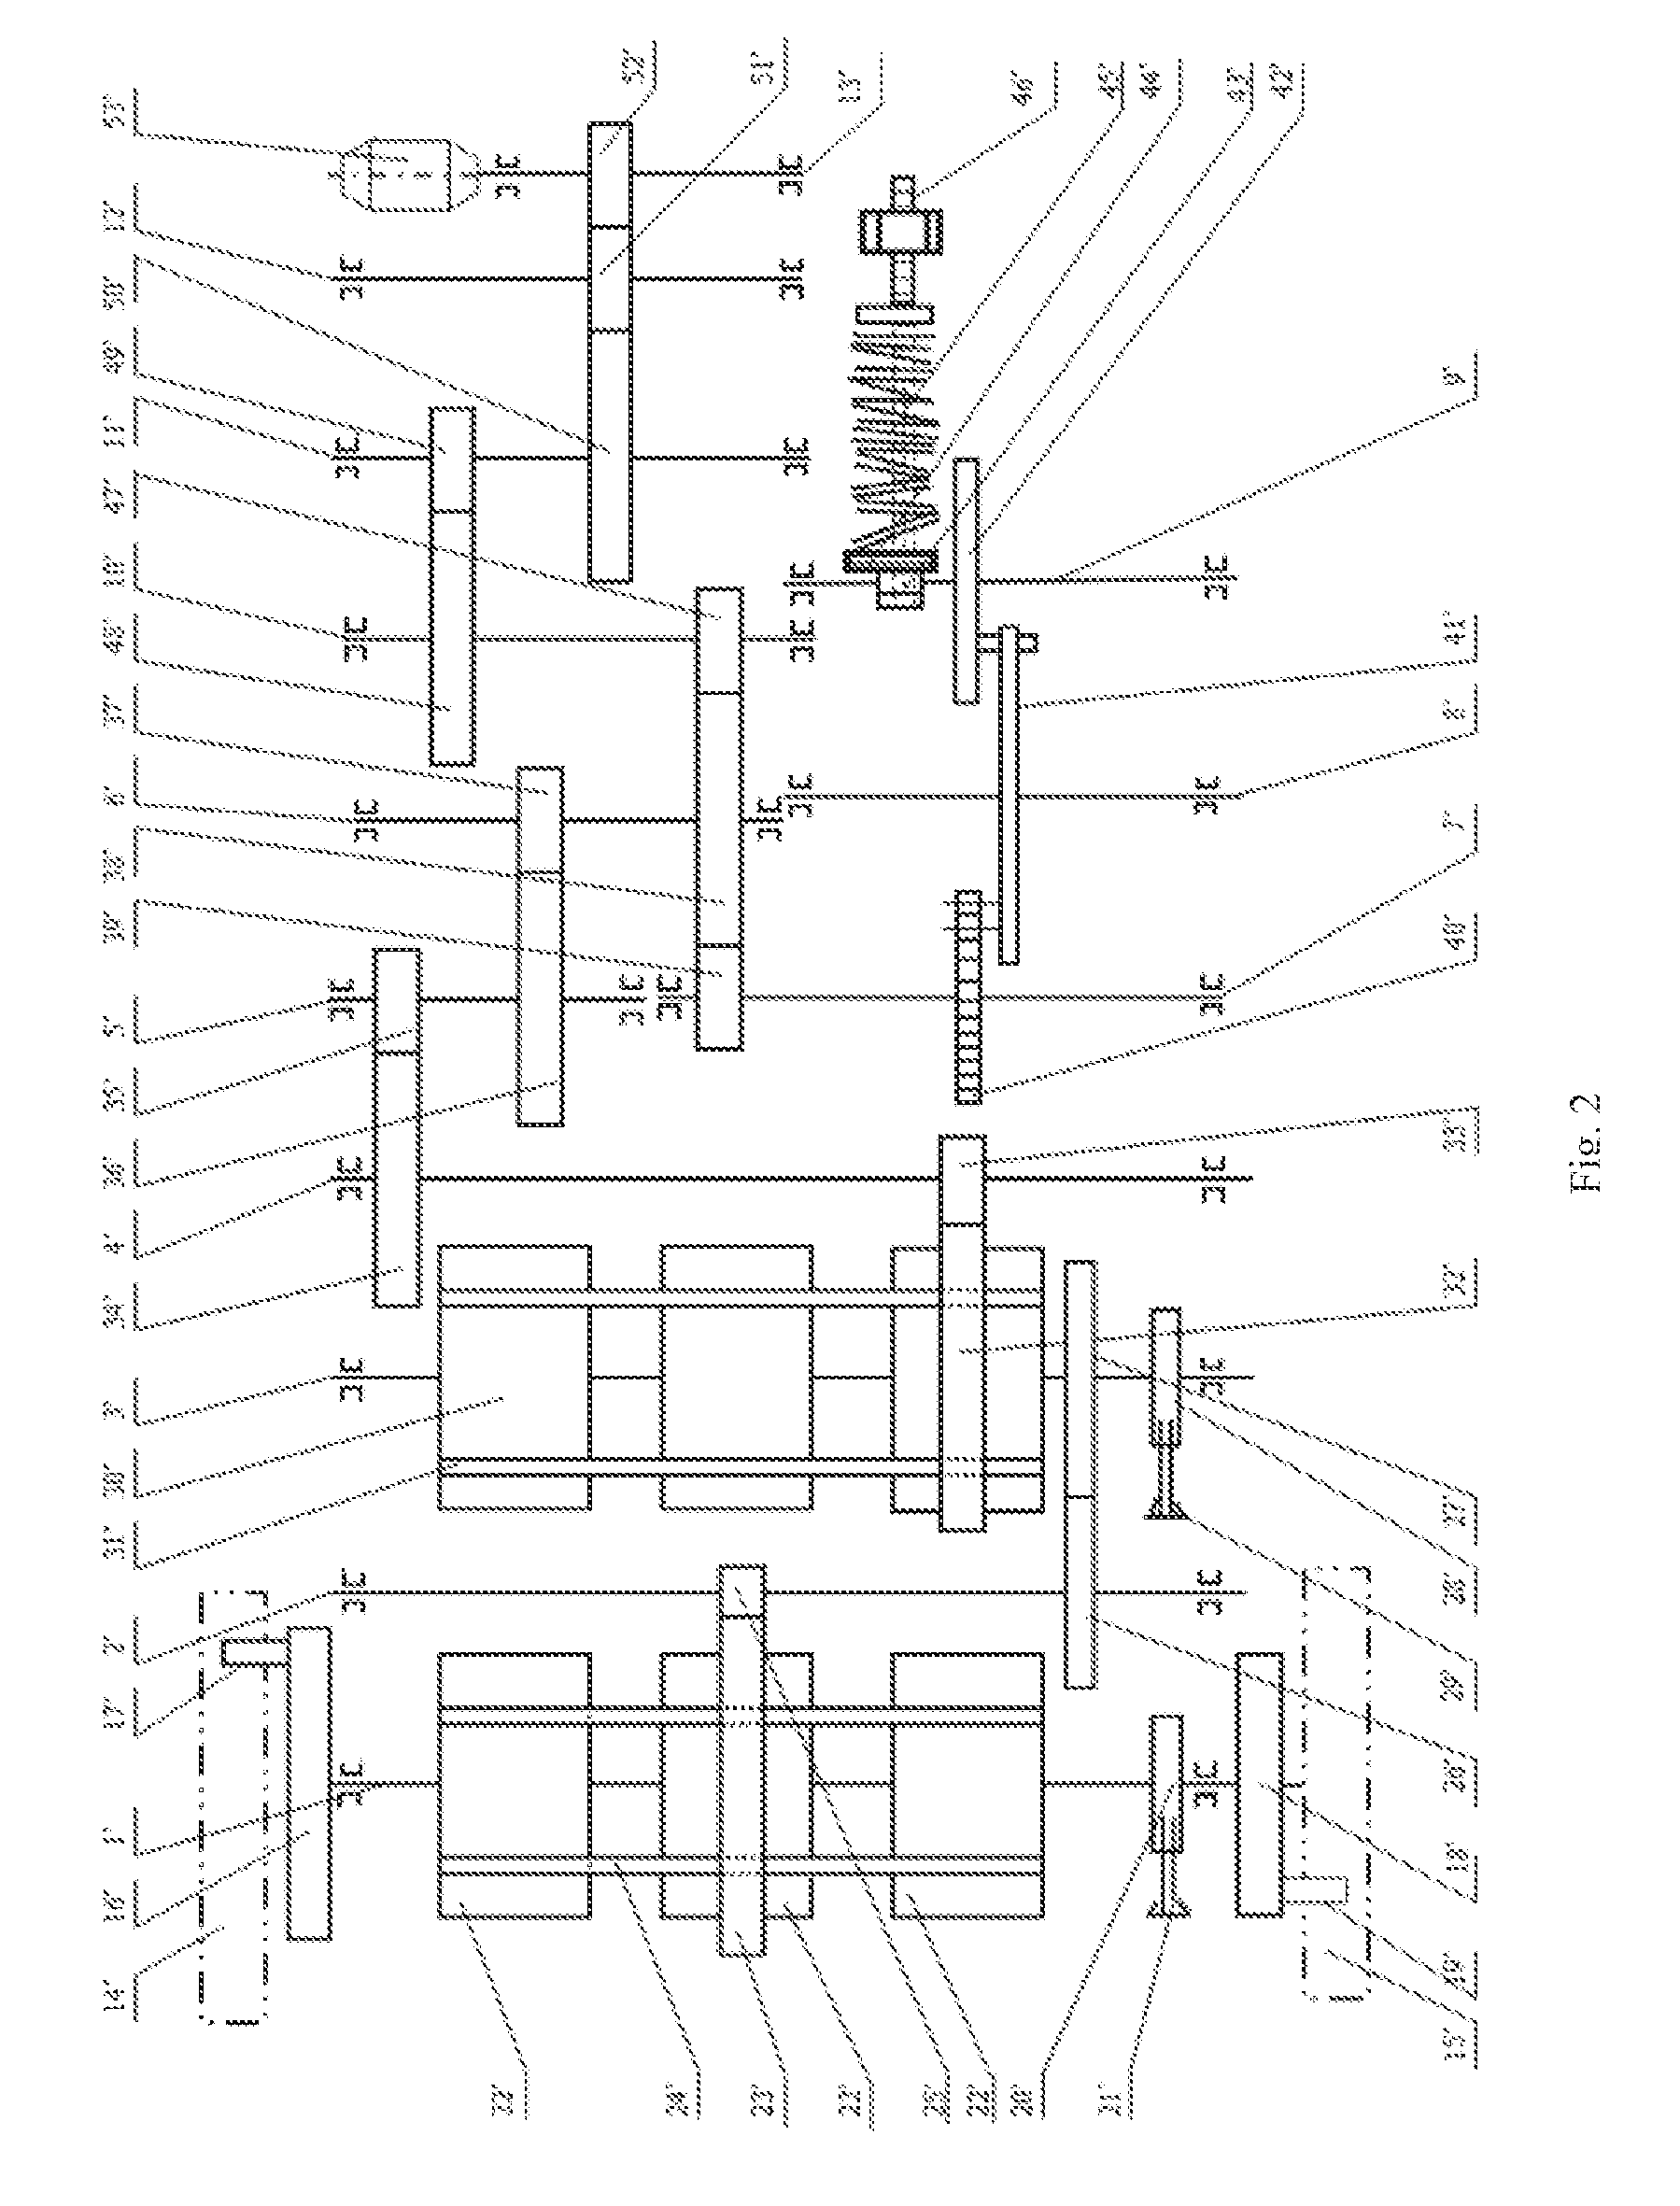 Body-building power generation apparatus and a method of generating power using the same